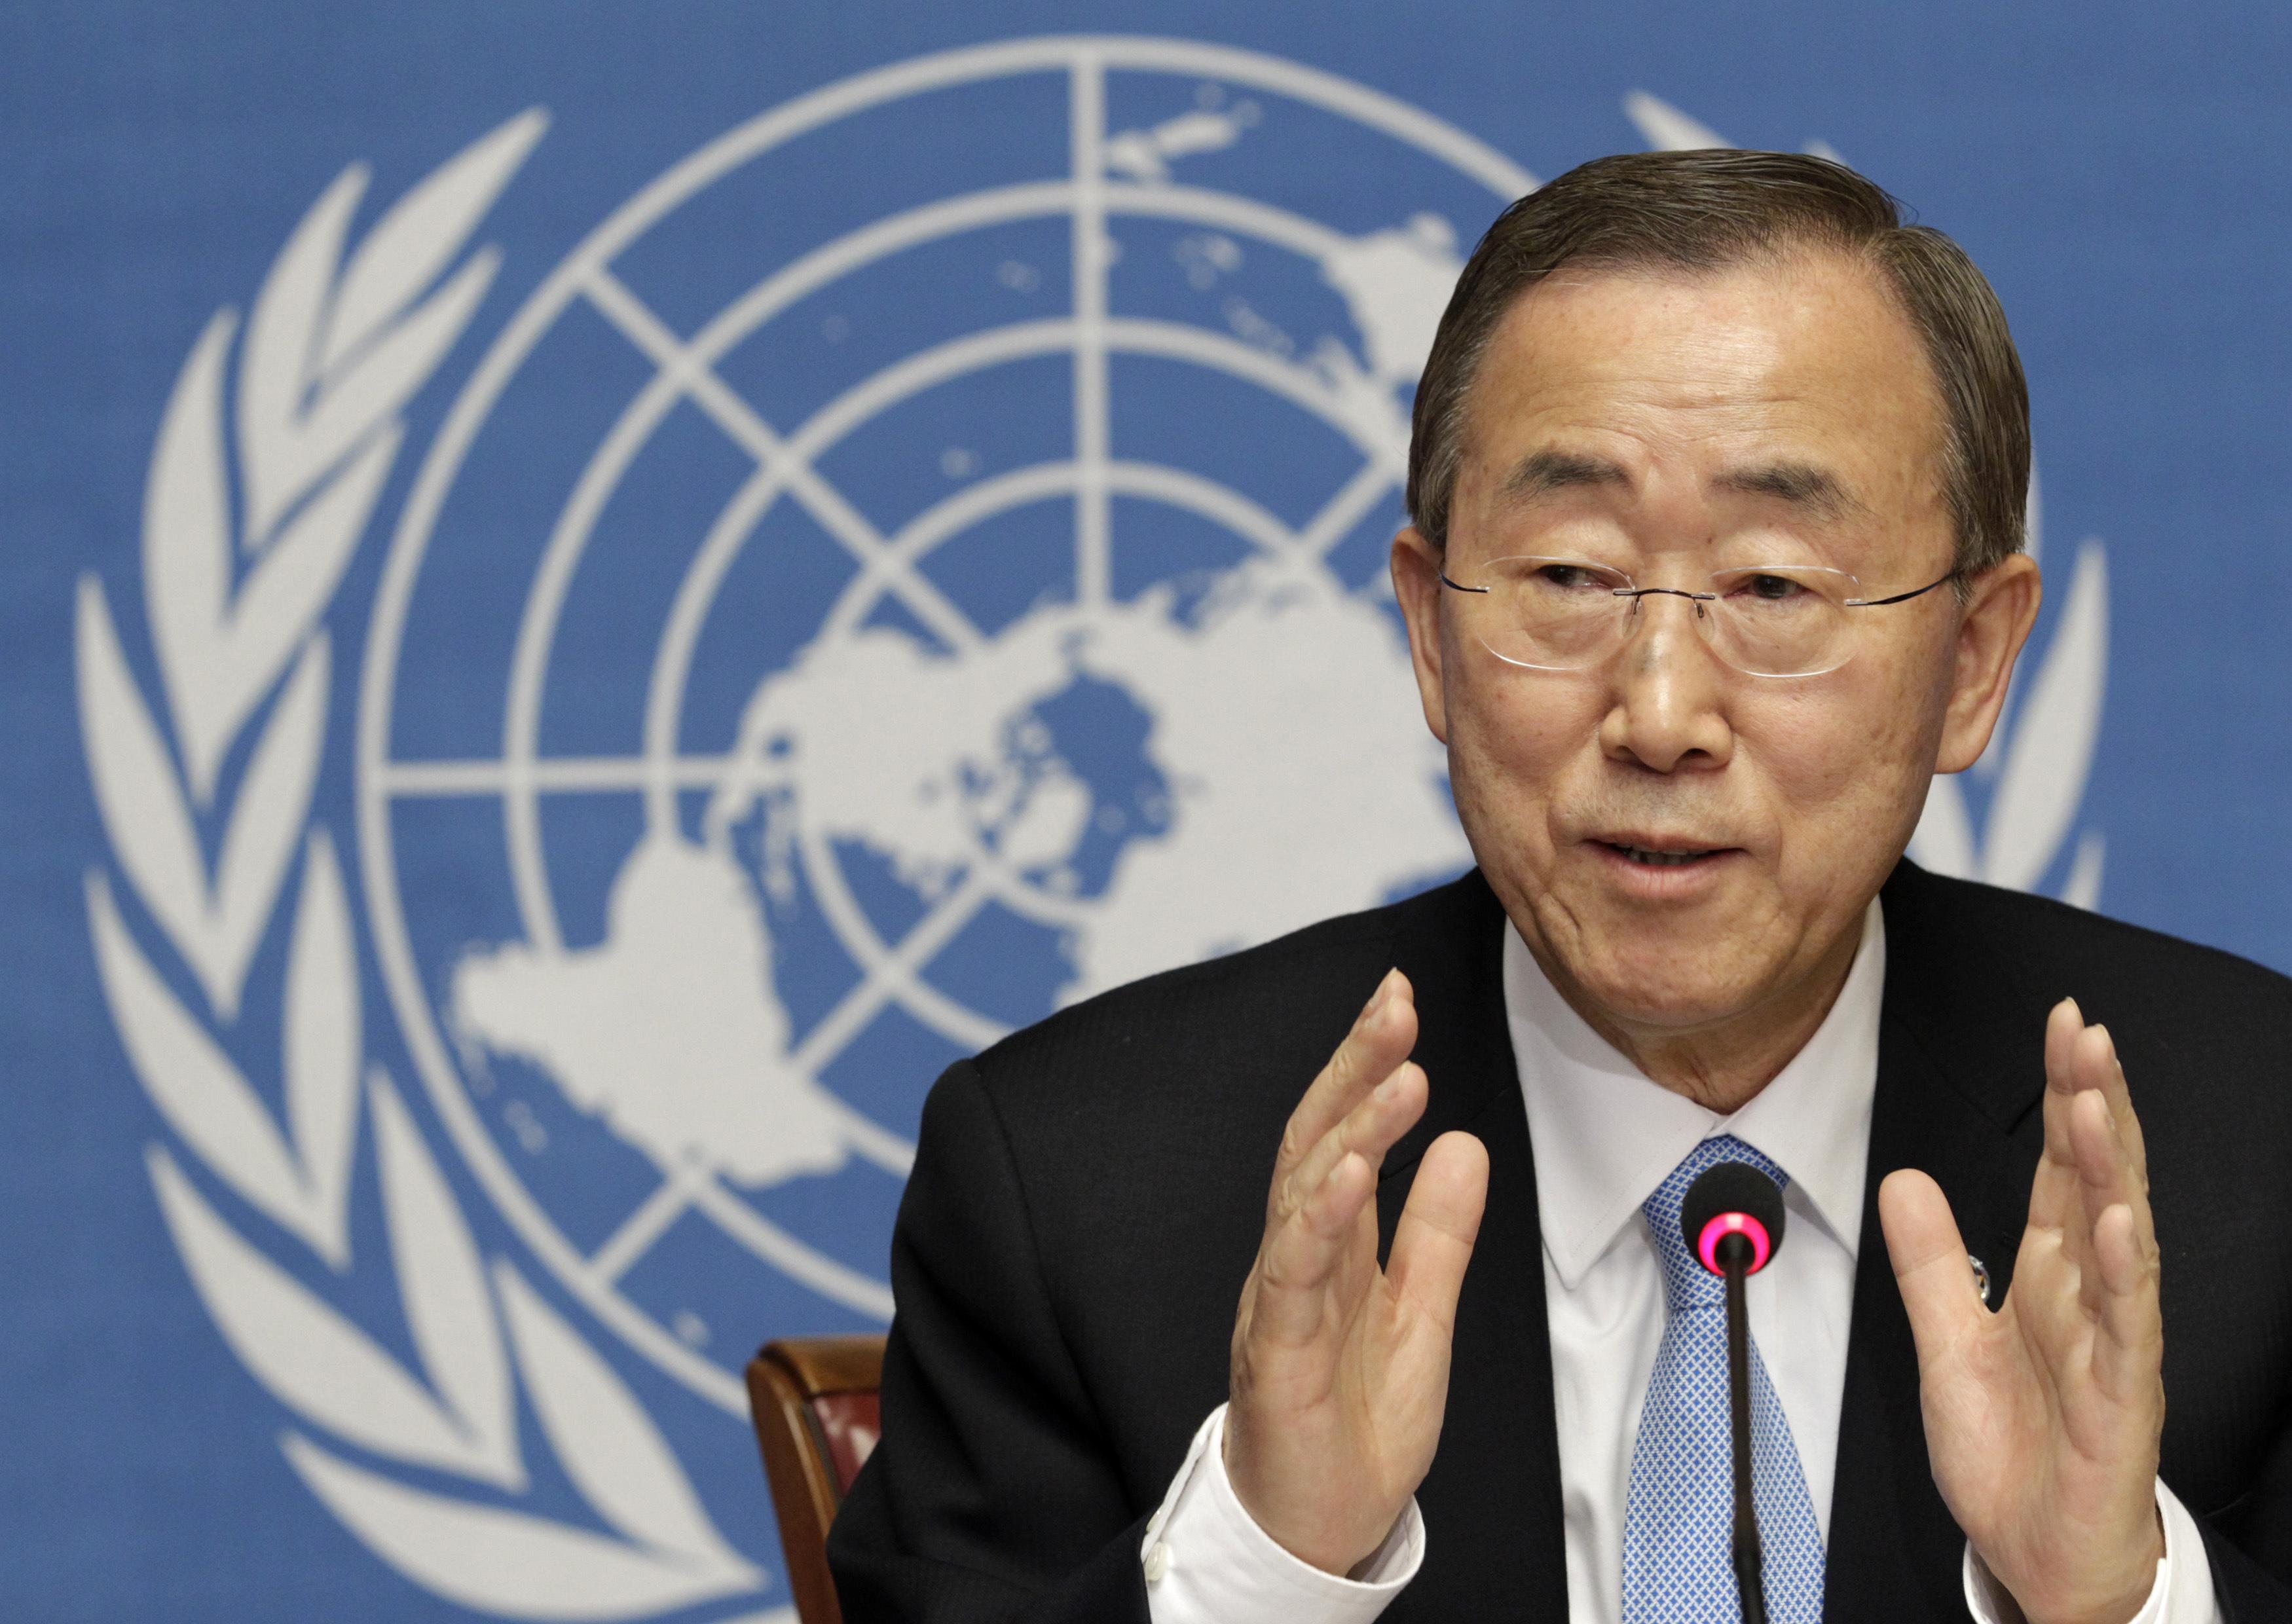 UN Secretary-General issued message on International Youth Day